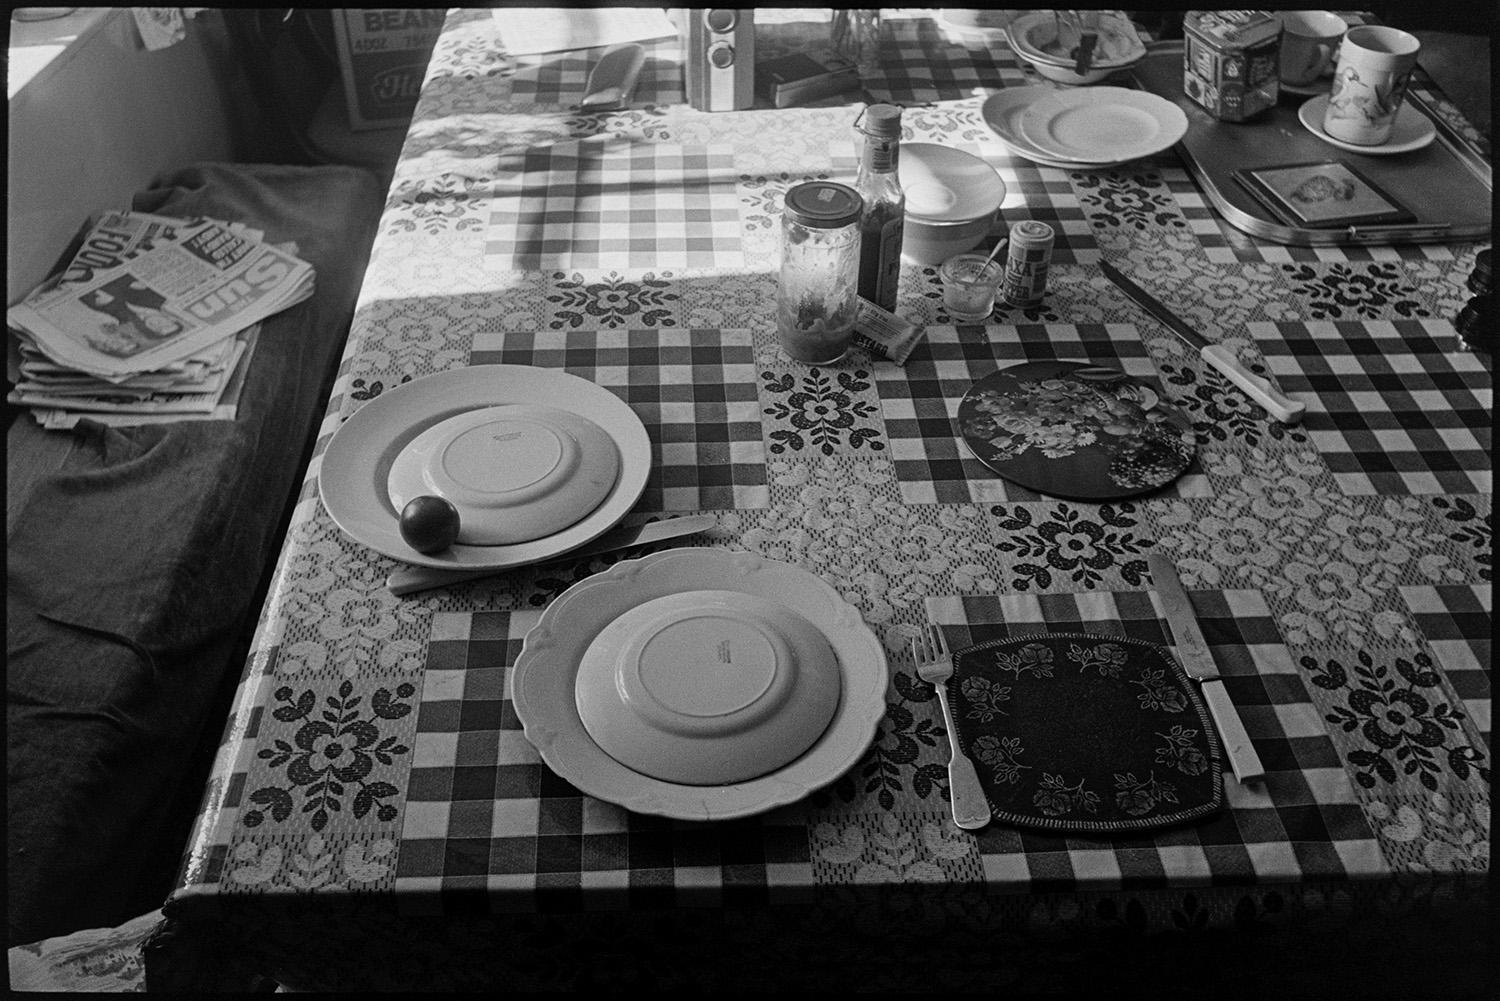 Cottage interior, sunlit table, tablecloth. 
[A sunlit kitchen table in a cottage at Mariansleigh. Plates, cups and jars are visible on the table. Two plates of food are covered. The table is covered with a tablecloth with a floral and lace design, and a small pile of newspapers is on the settle next to the table.]